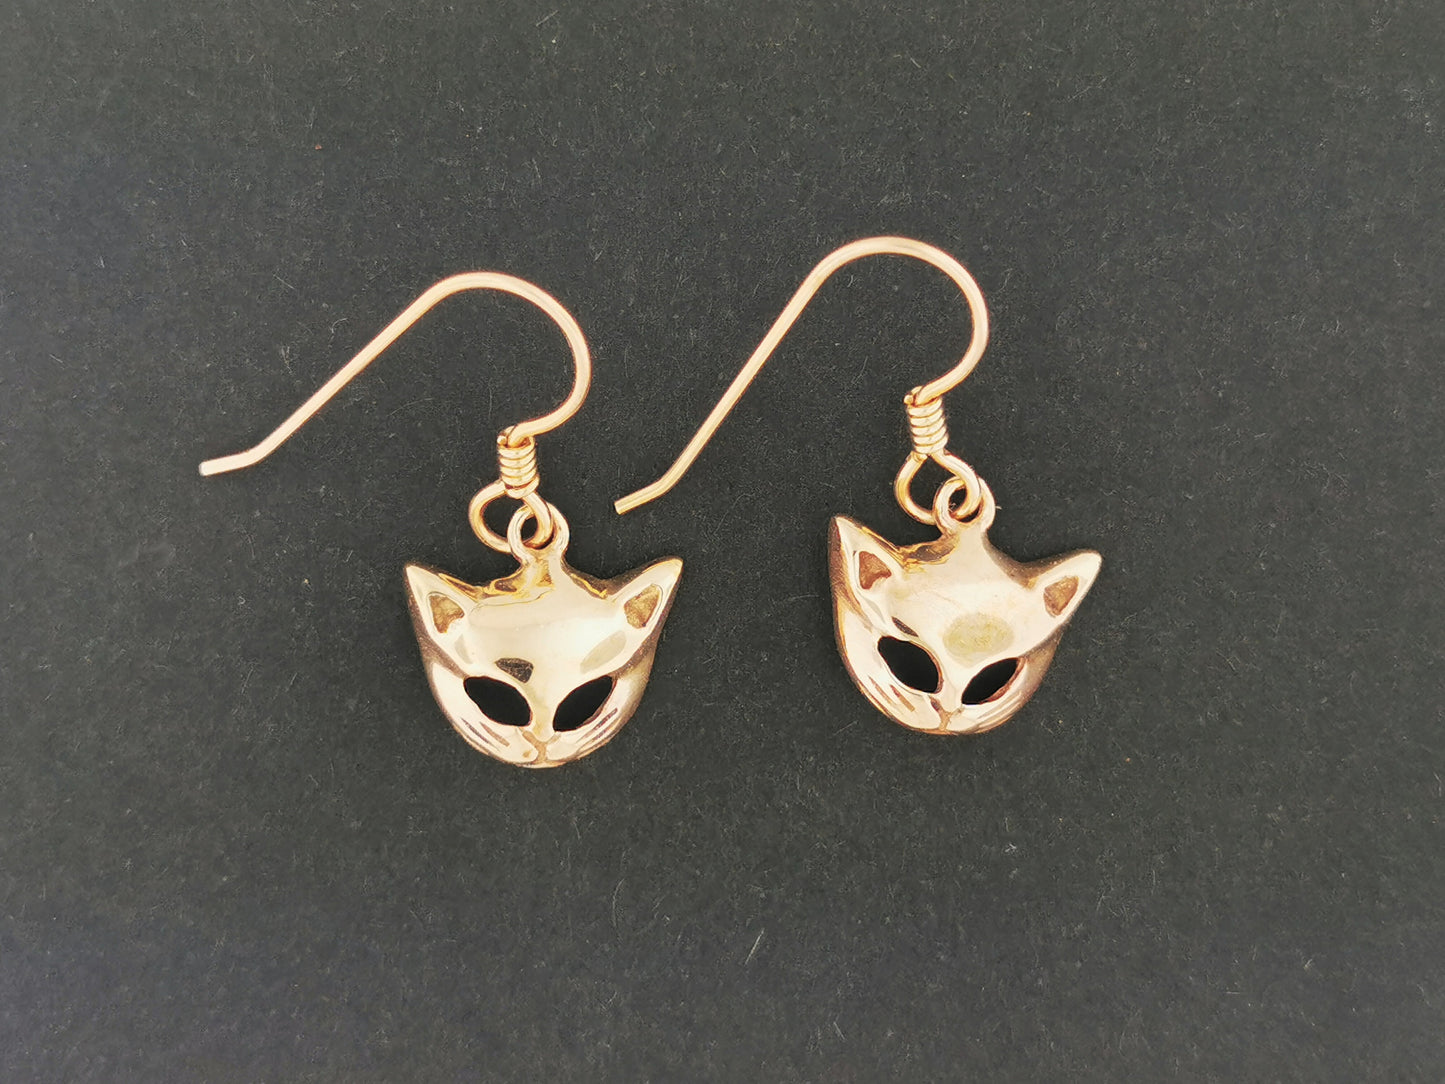 Cat Mask Charm Earrings in Sterling Silver or Antique bronze